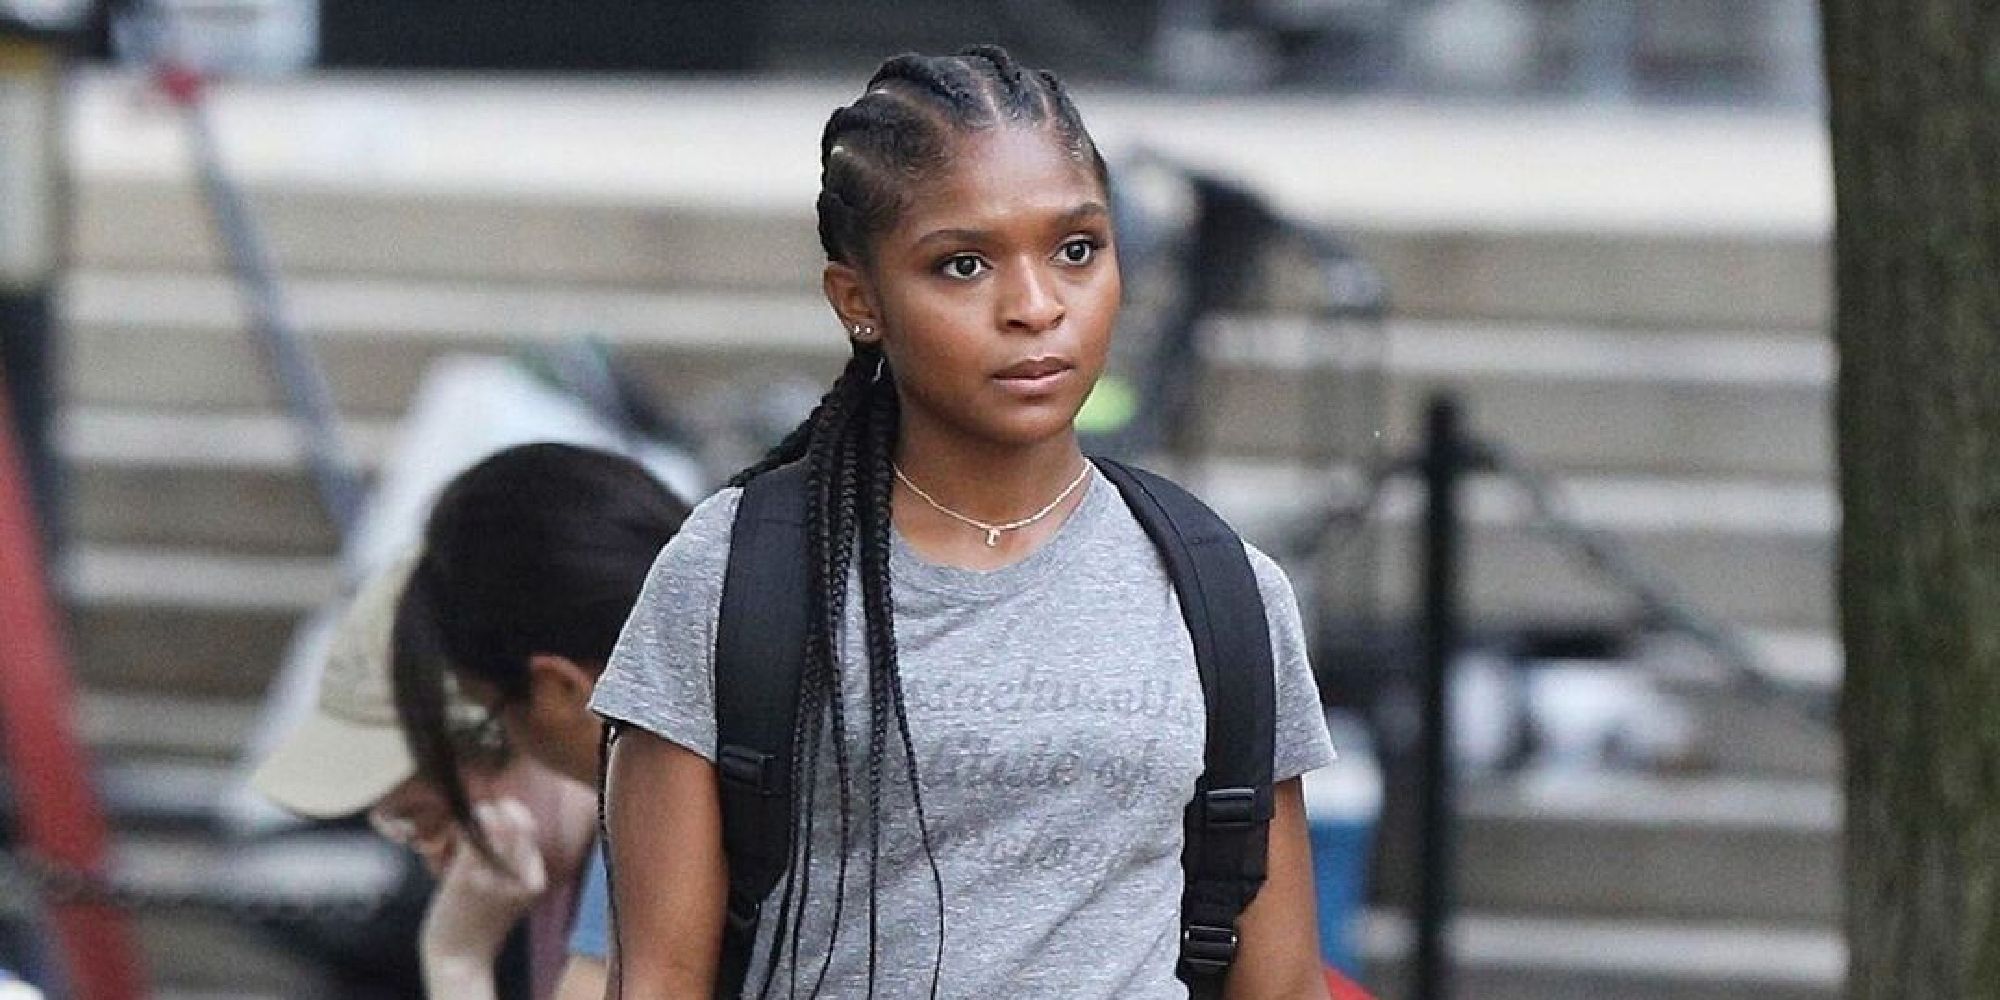 Dominique Thornton as Riri Williams on the set of Black Panther Wakanda Forever